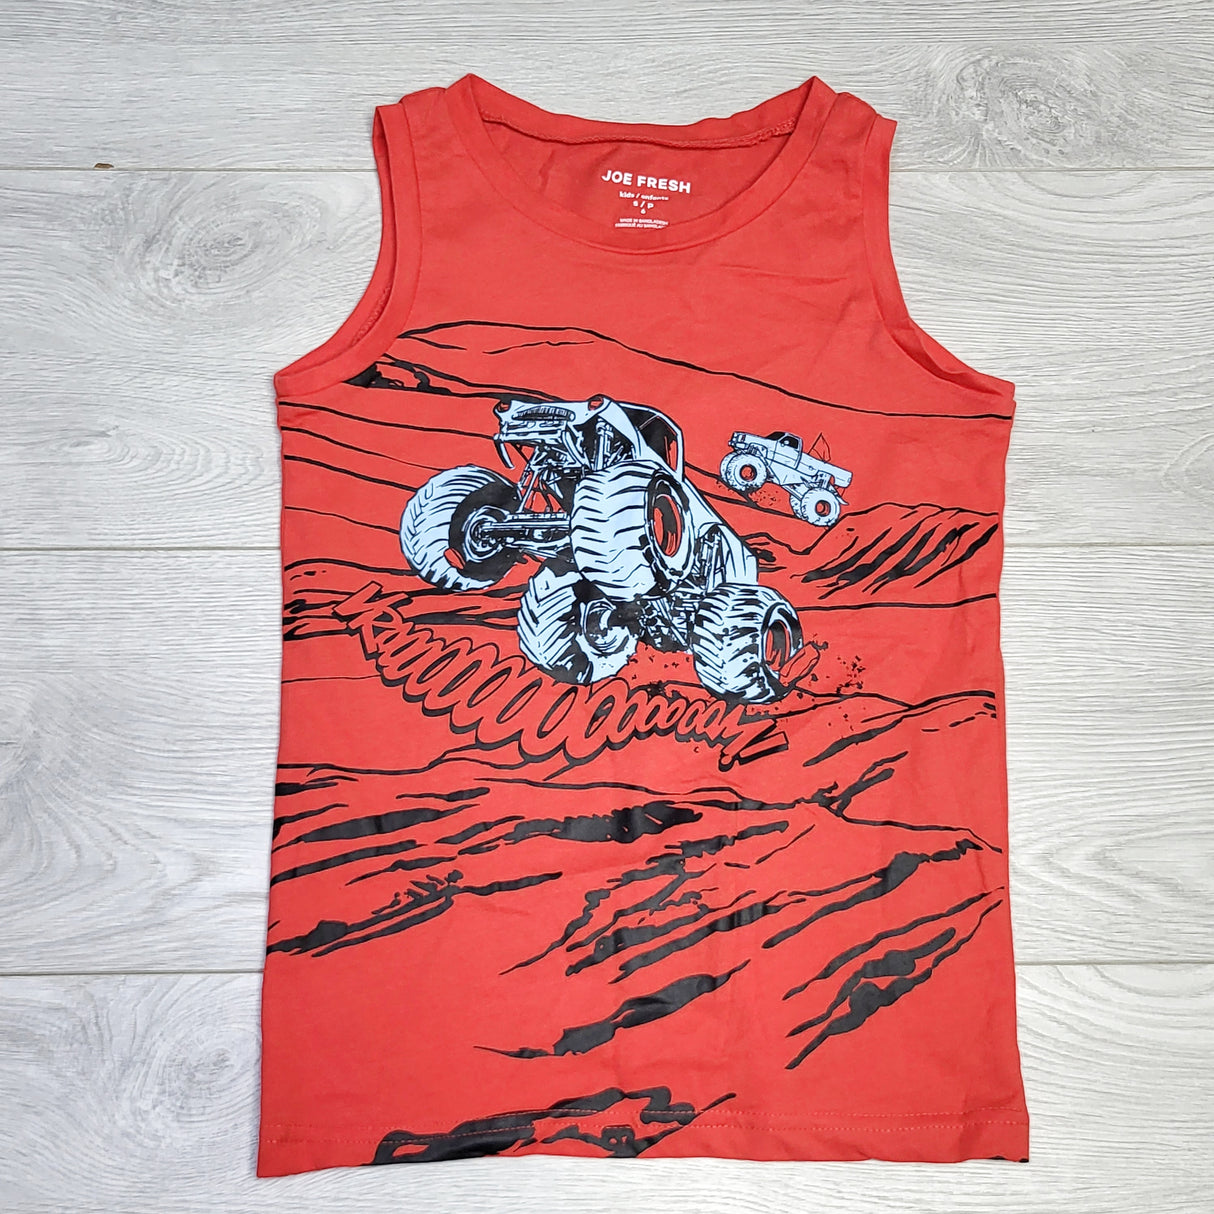 MSNDS1 - Joe red tank top with monster truck. Size 6